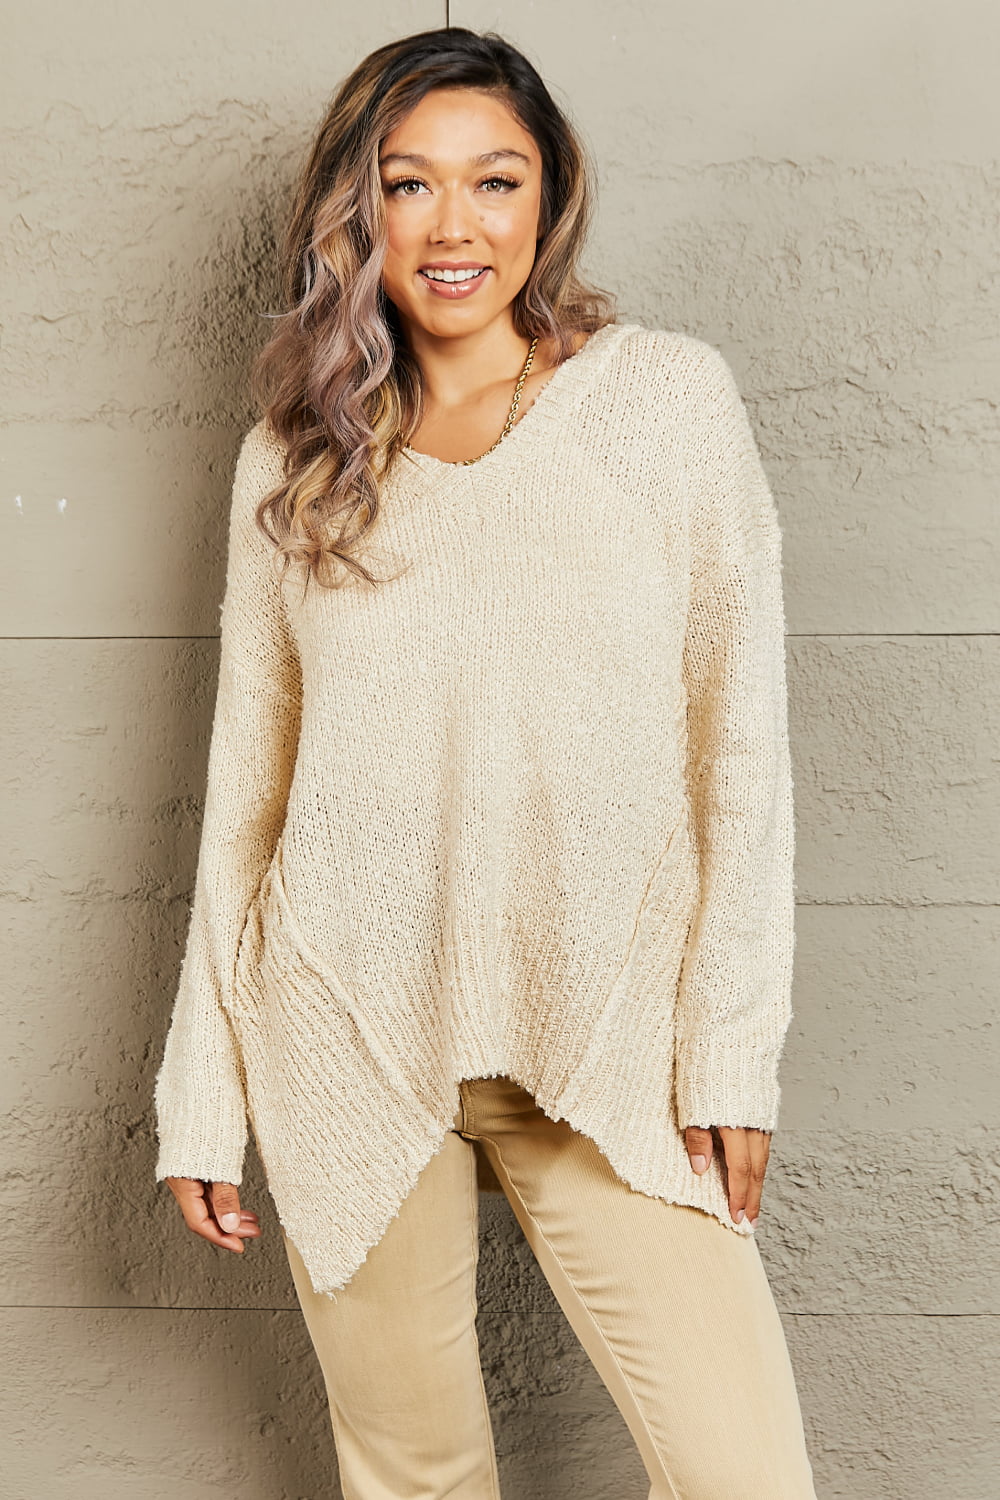 By The Fire Full Size Draped Detail Knit Sweater - Sweaters - Shirts & Tops - 6 - 2024